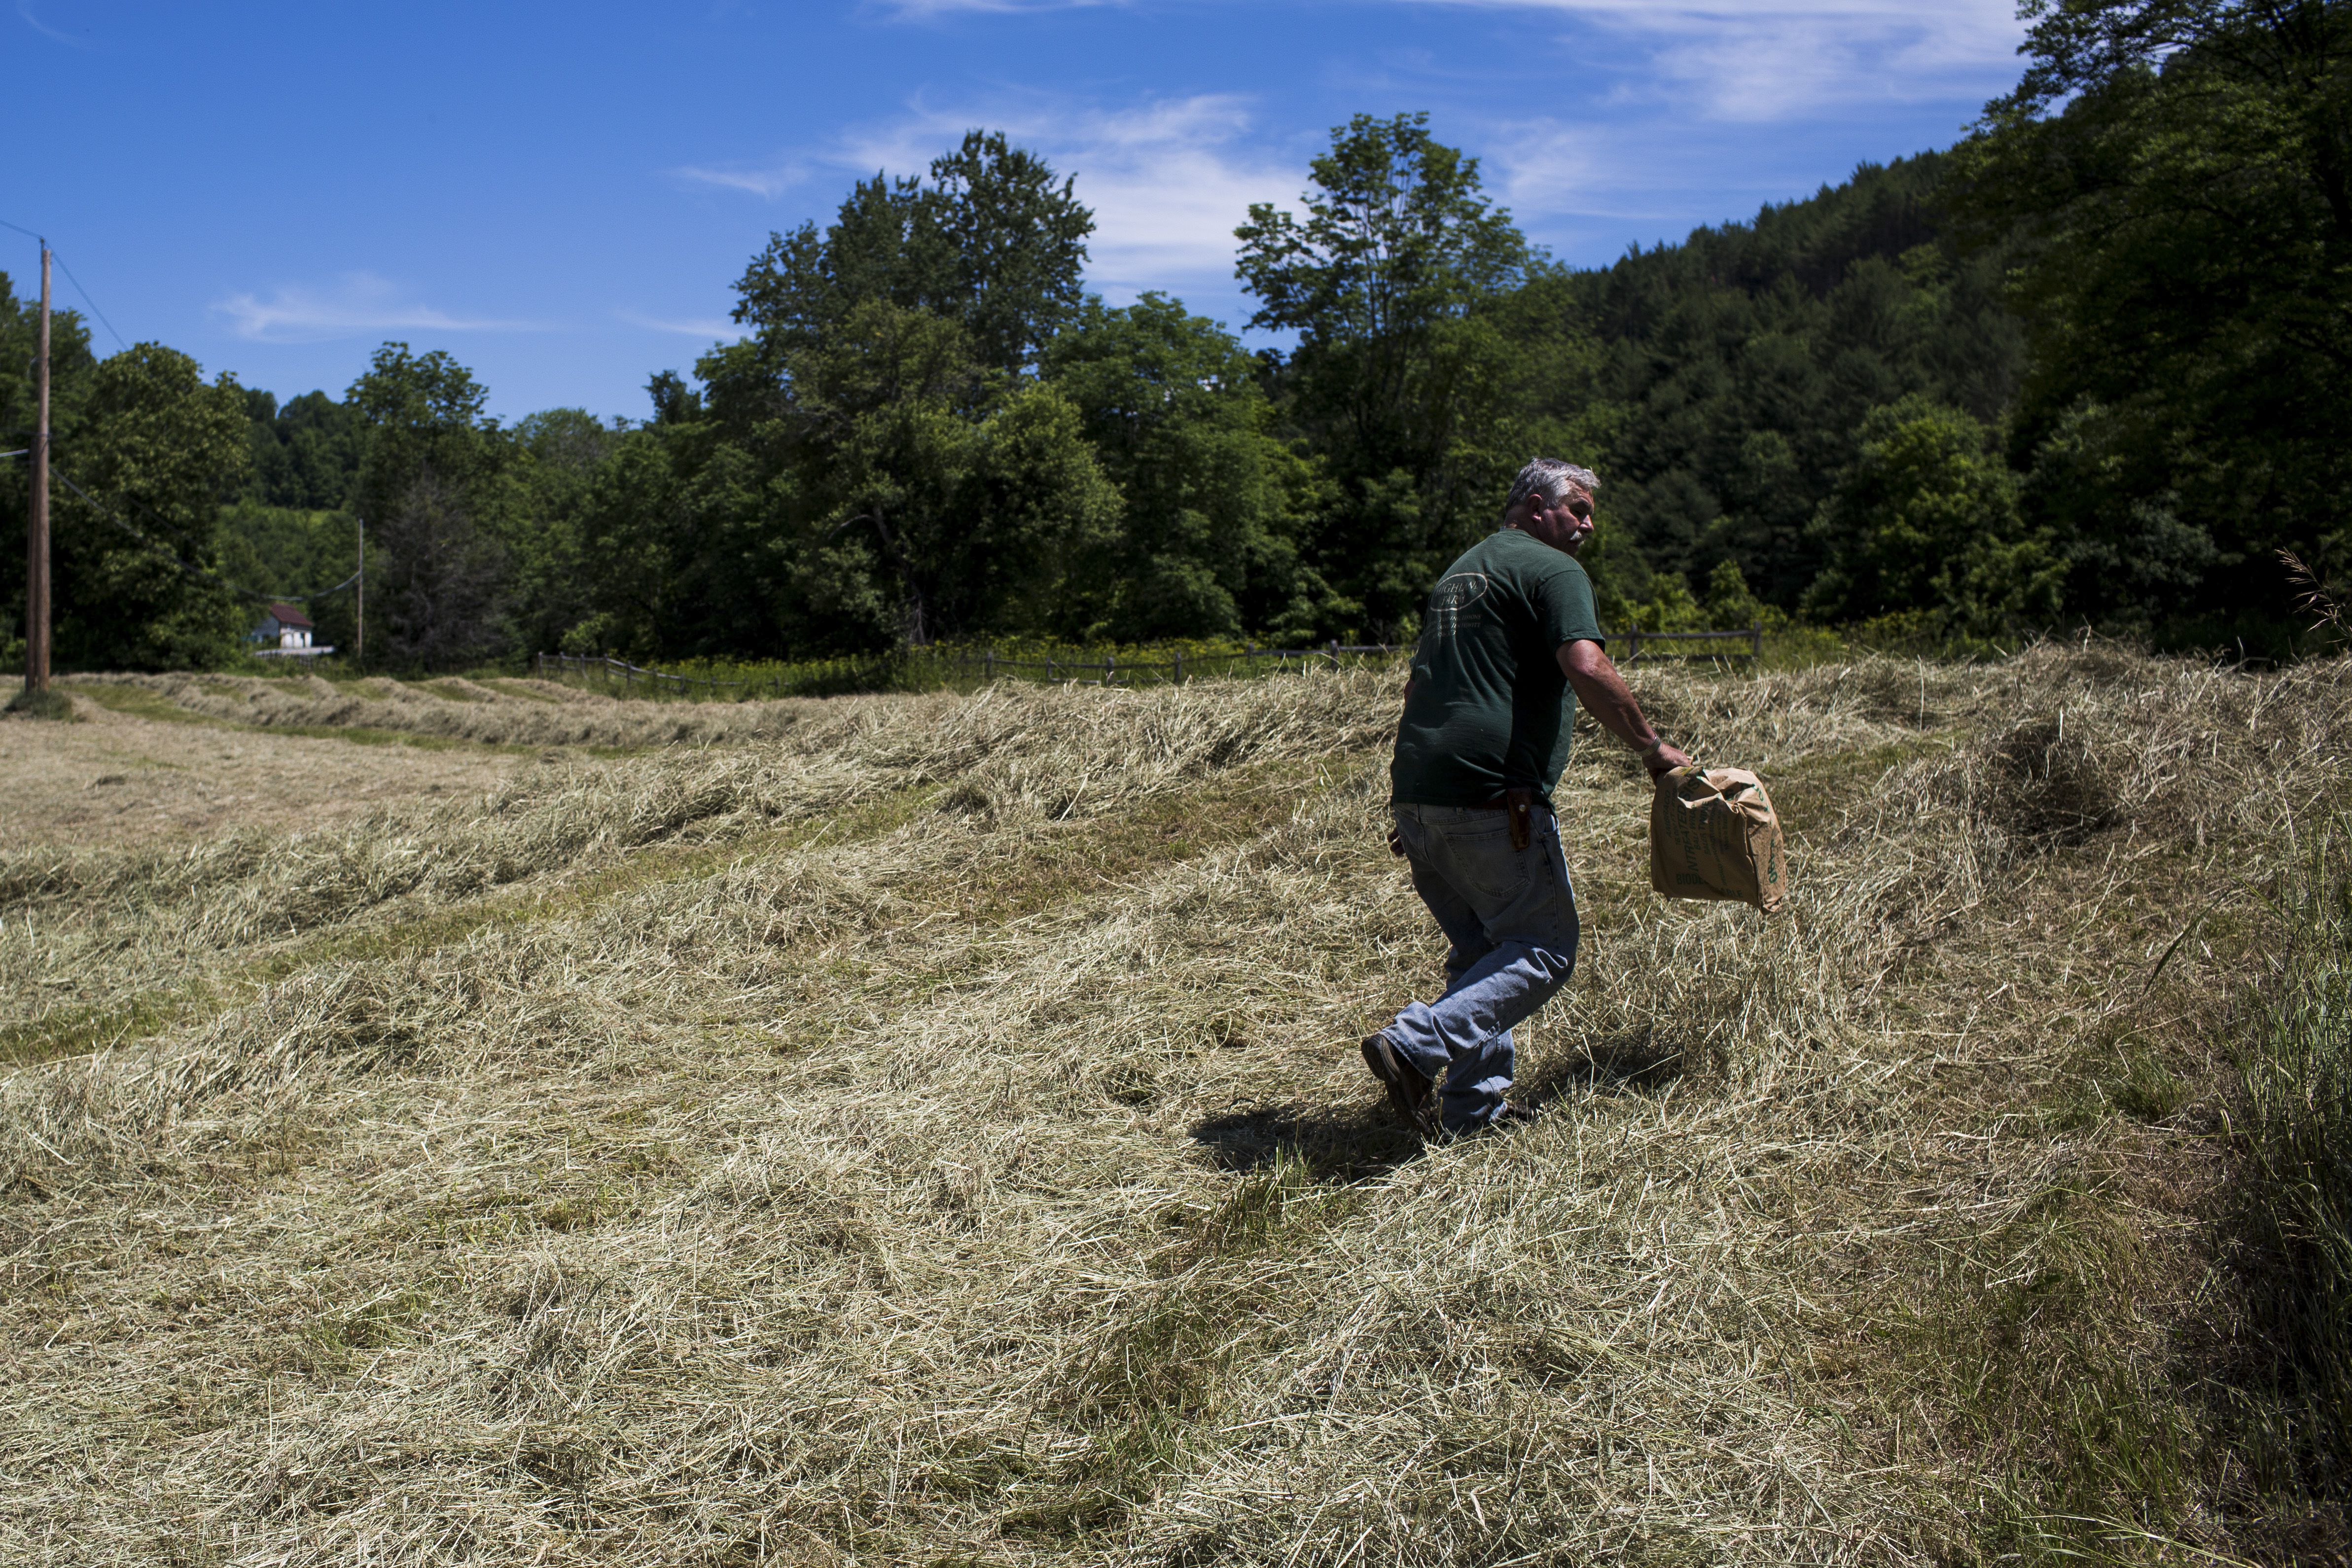 After loading his baler, Pomfret resident Miller Hewitt carries a bag of twine through a field of raked dry hay toward his truck in Pomfret, Vt., on July 5, 2016. Hewitt, who raises Black Angus cows and runs the butcher block at Mac’s Market in Woodstock, was taking advantage of the recent dry spell and preparing to bale a large amount of dry hay with his brother Chandler. “It’s not usually like this,” he said, referring to Vermont’s summer weather. (Valley News - Mac Snyder) Copyright Valley News. May not be reprinted or used online without permission. Send requests to permission@vnews.com.